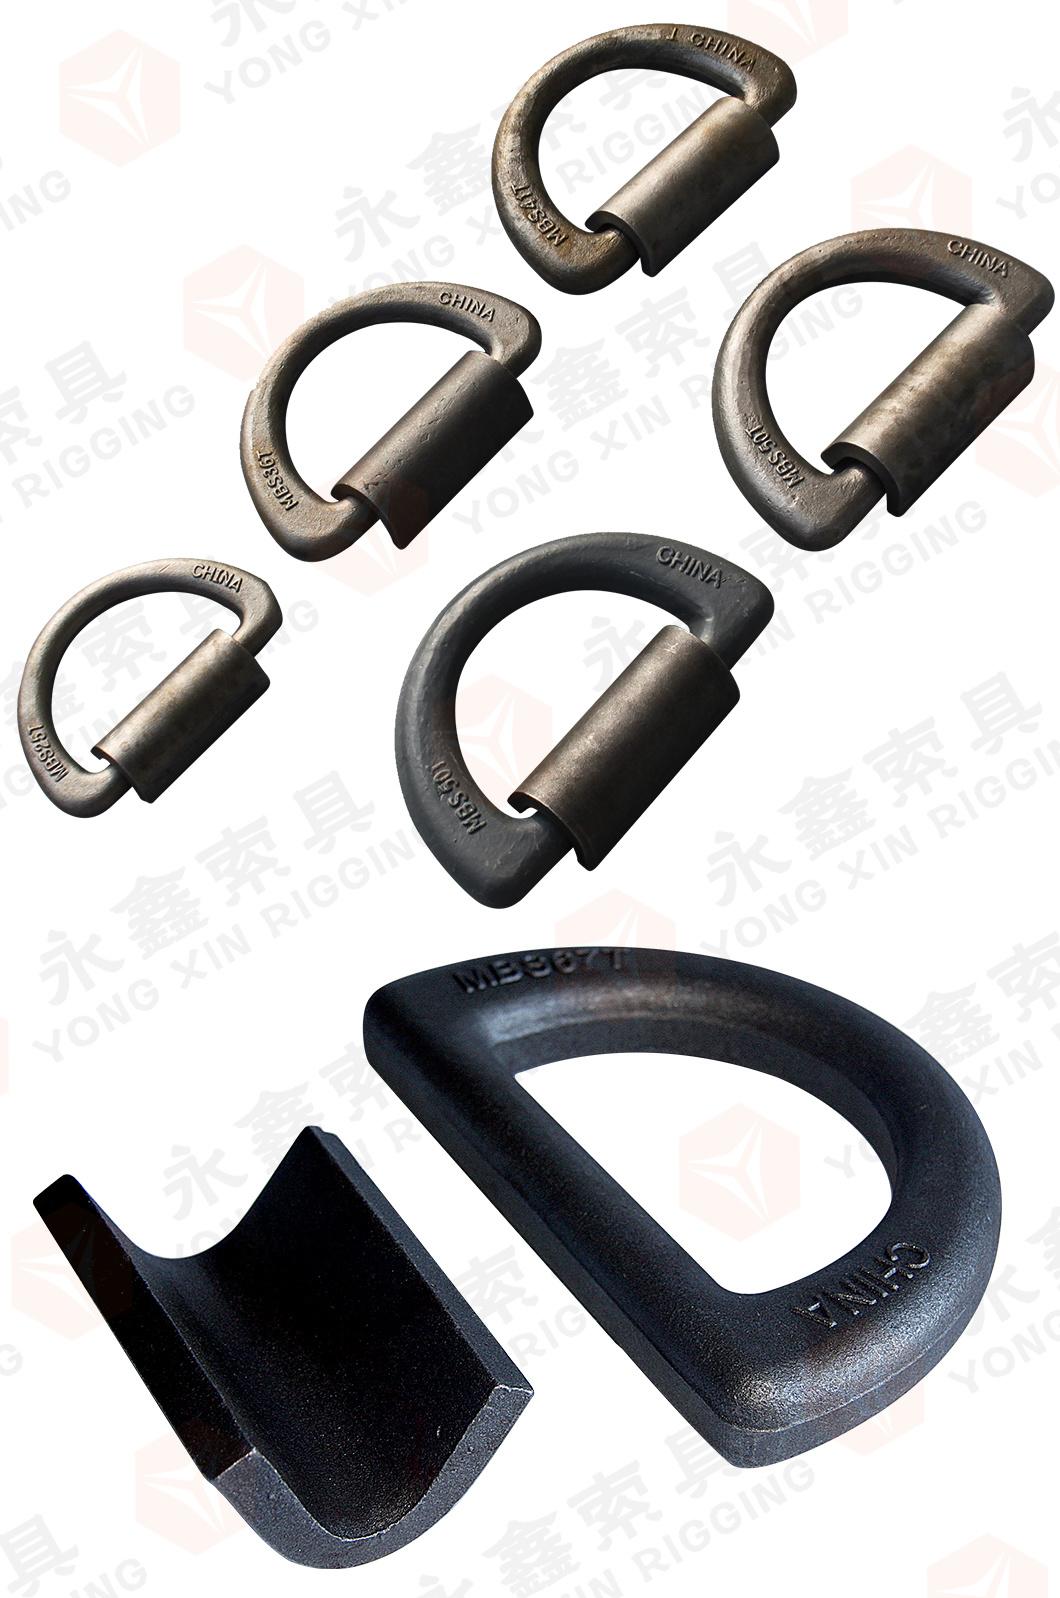 50t Forged Steel Weld on Container Lashing D Ring with Clip